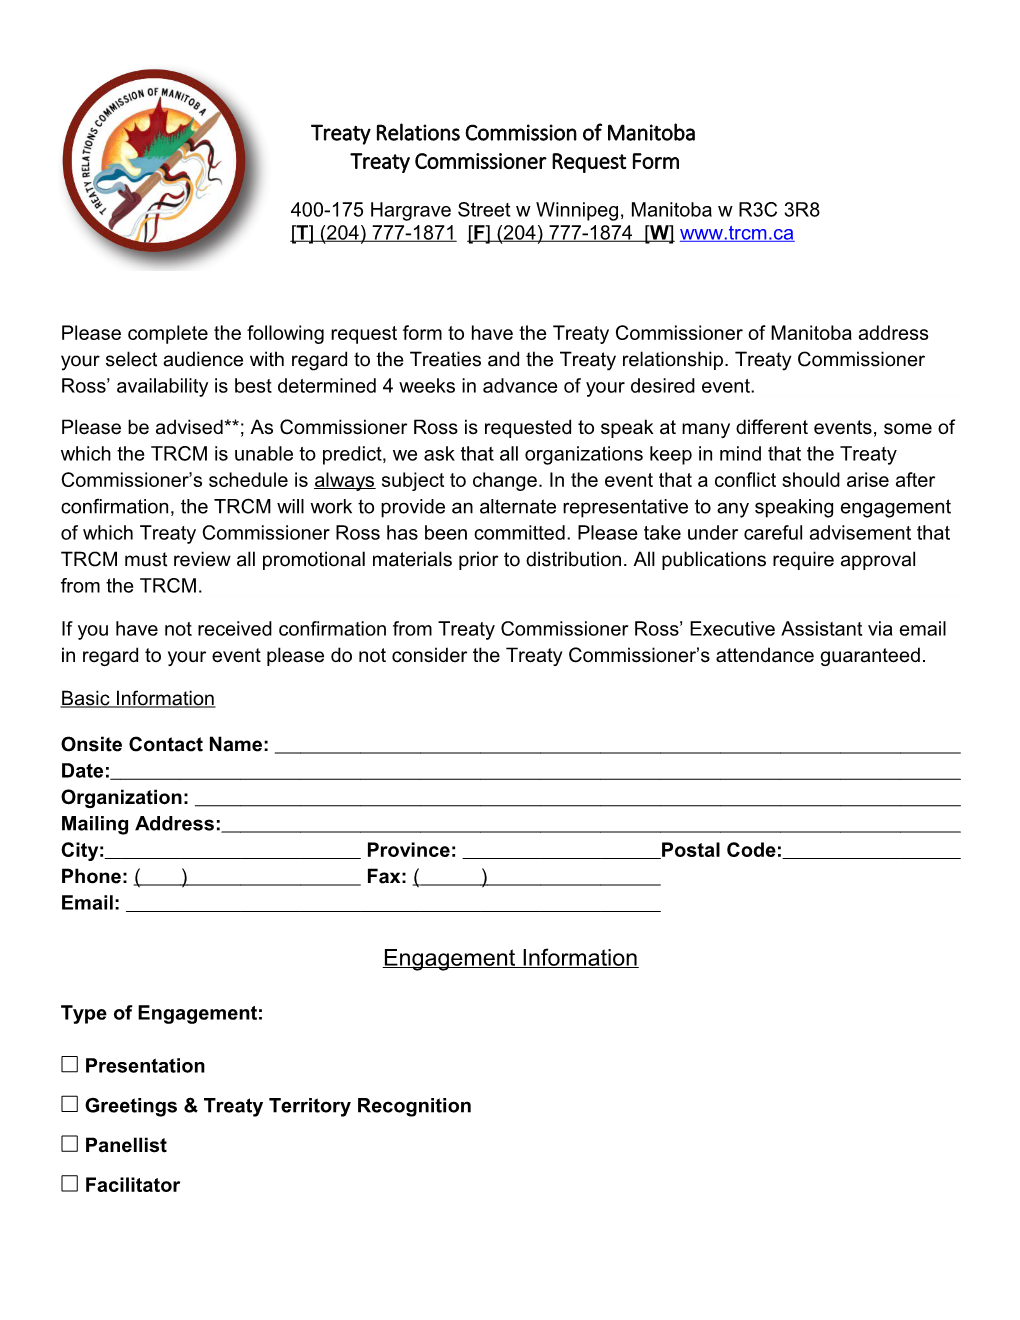 Treaty Relations Commission of Manitoba